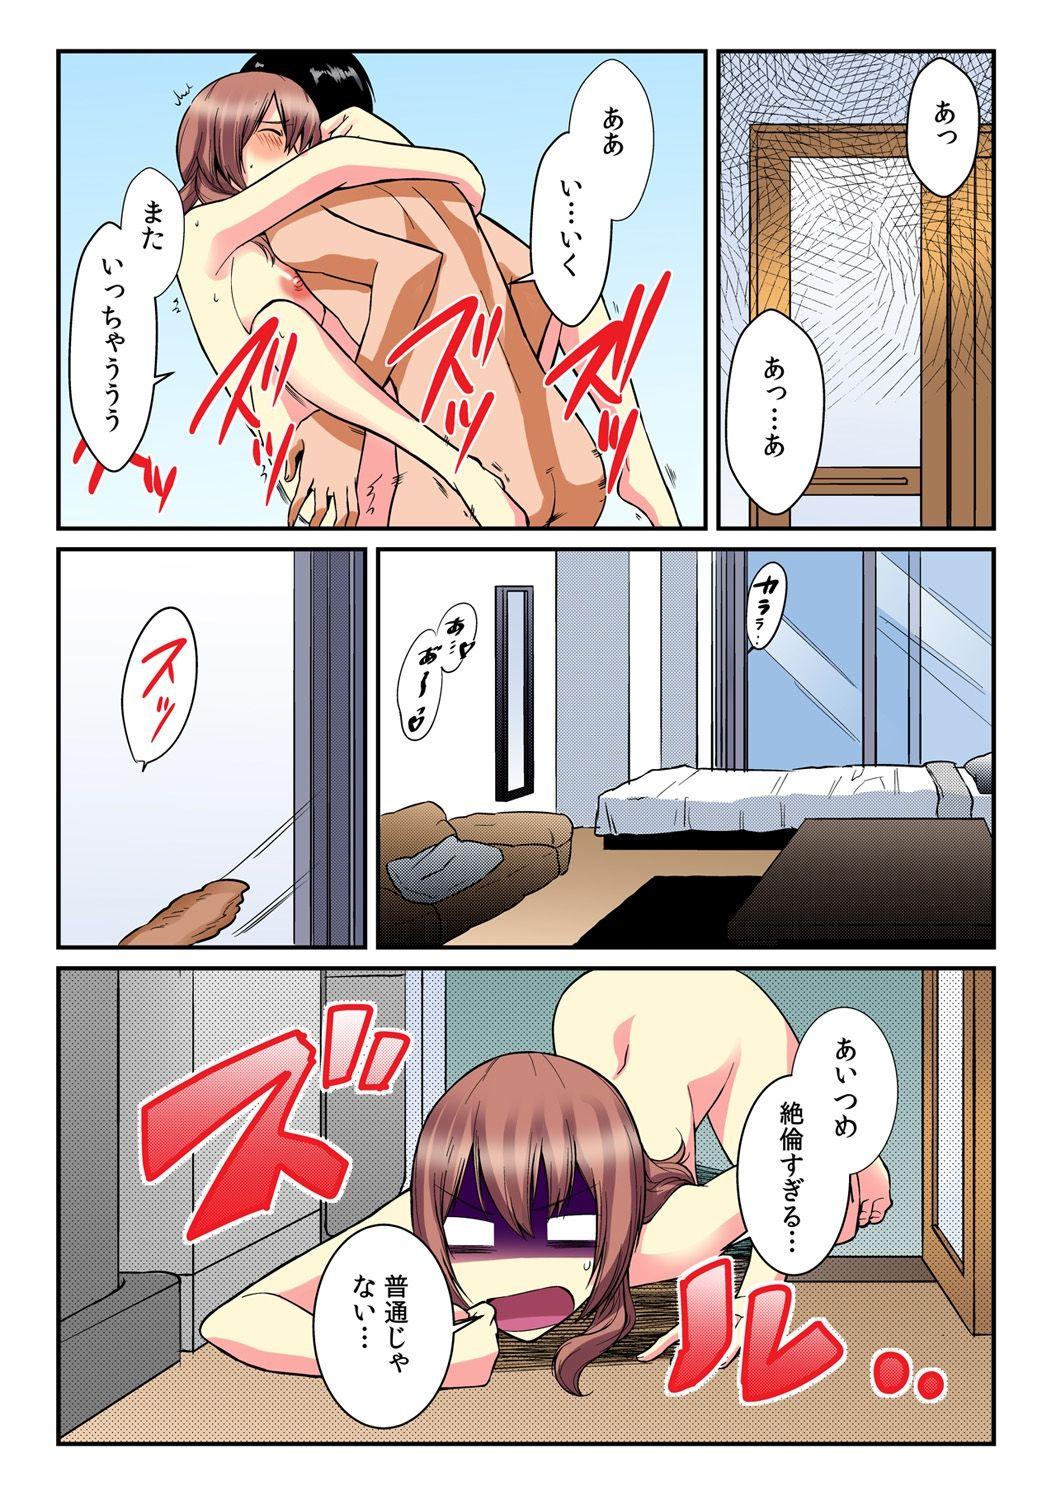 [Akagi Gijou / Akahige] I became a girl- and I definitely can't let anyone find out! (Full color) 2 2